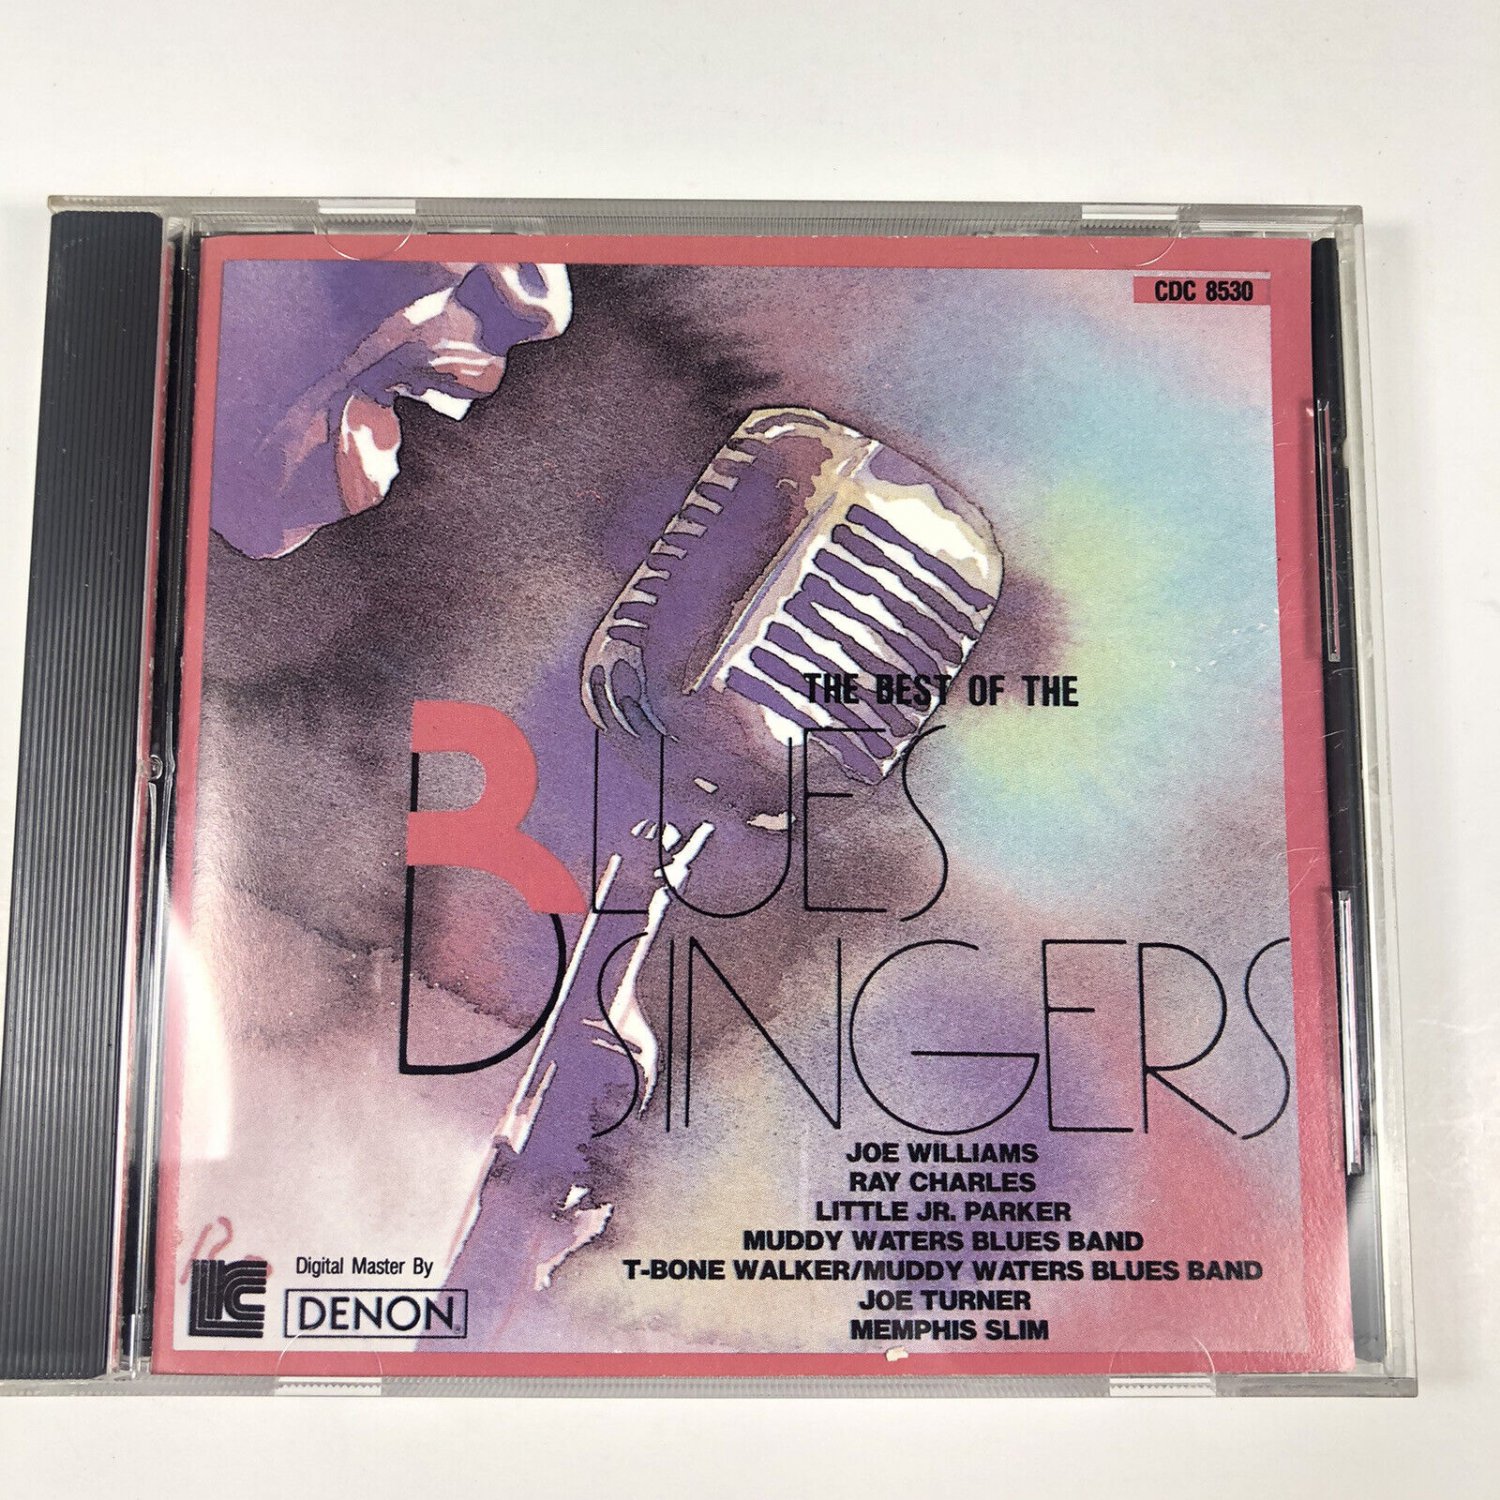 used cd-the best of the blues singers-1989-lrc-sonny lester collection-various artist-blues-look!